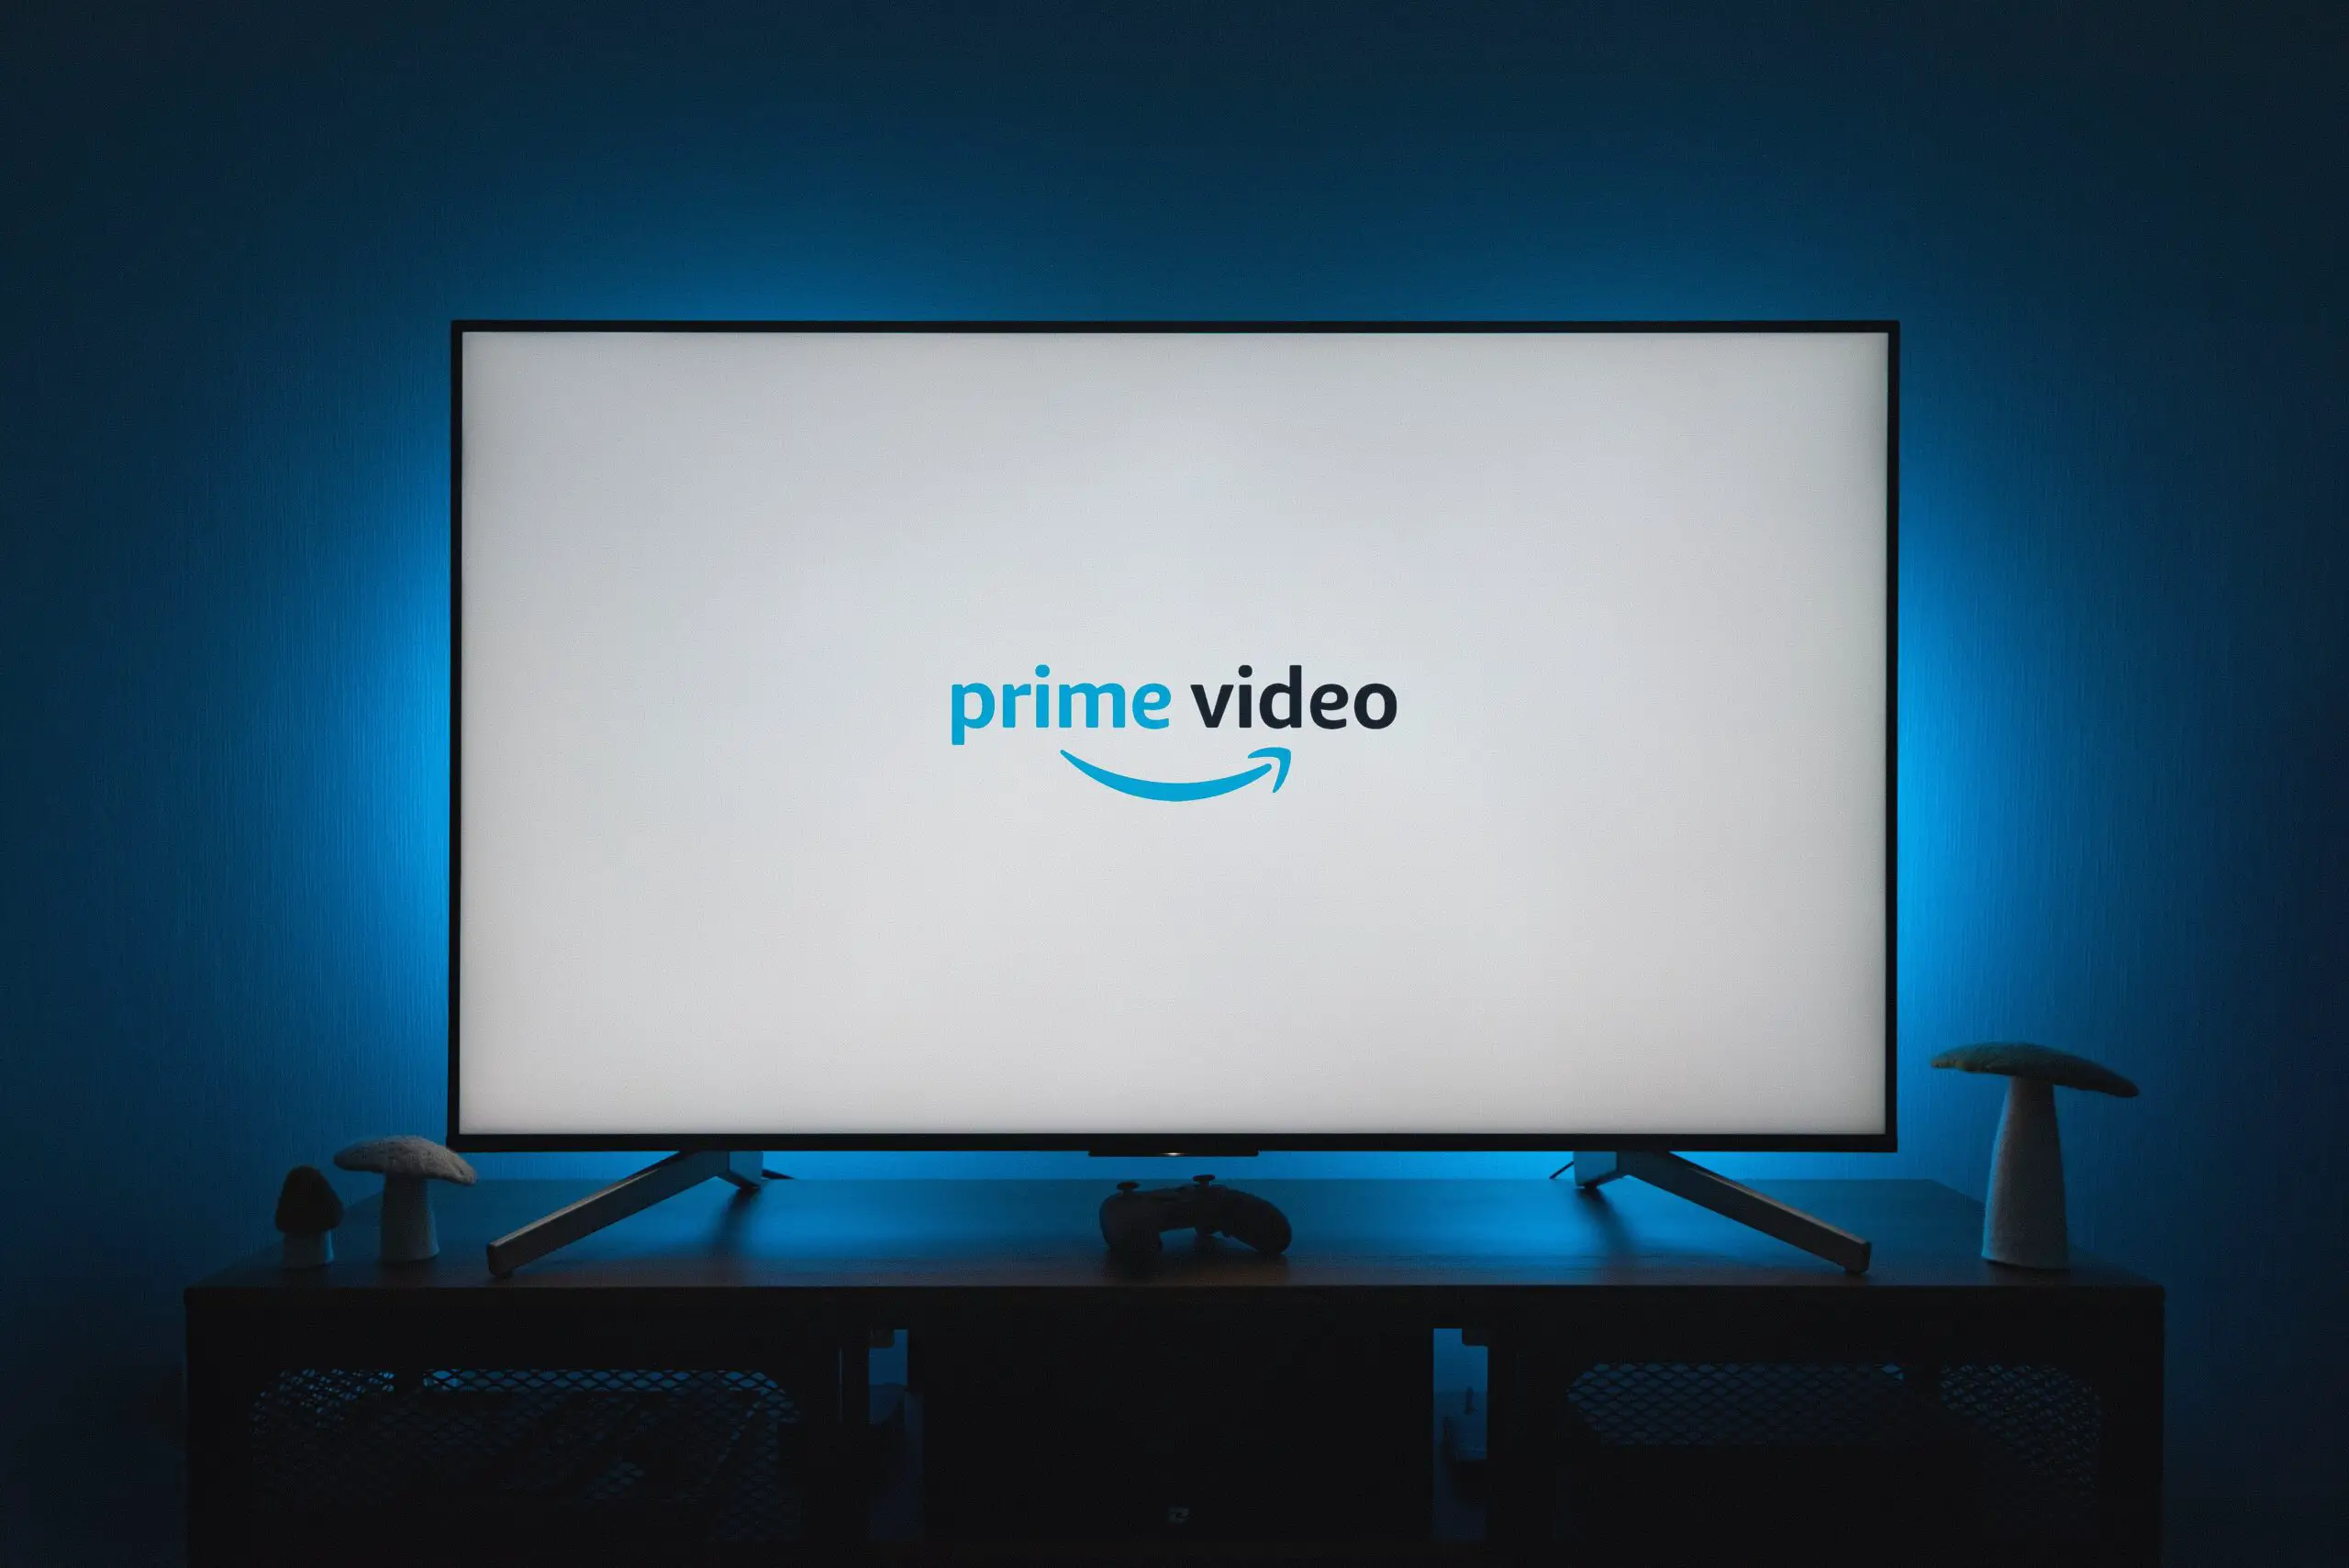 Can You Get Prime Video On Virgin TV?